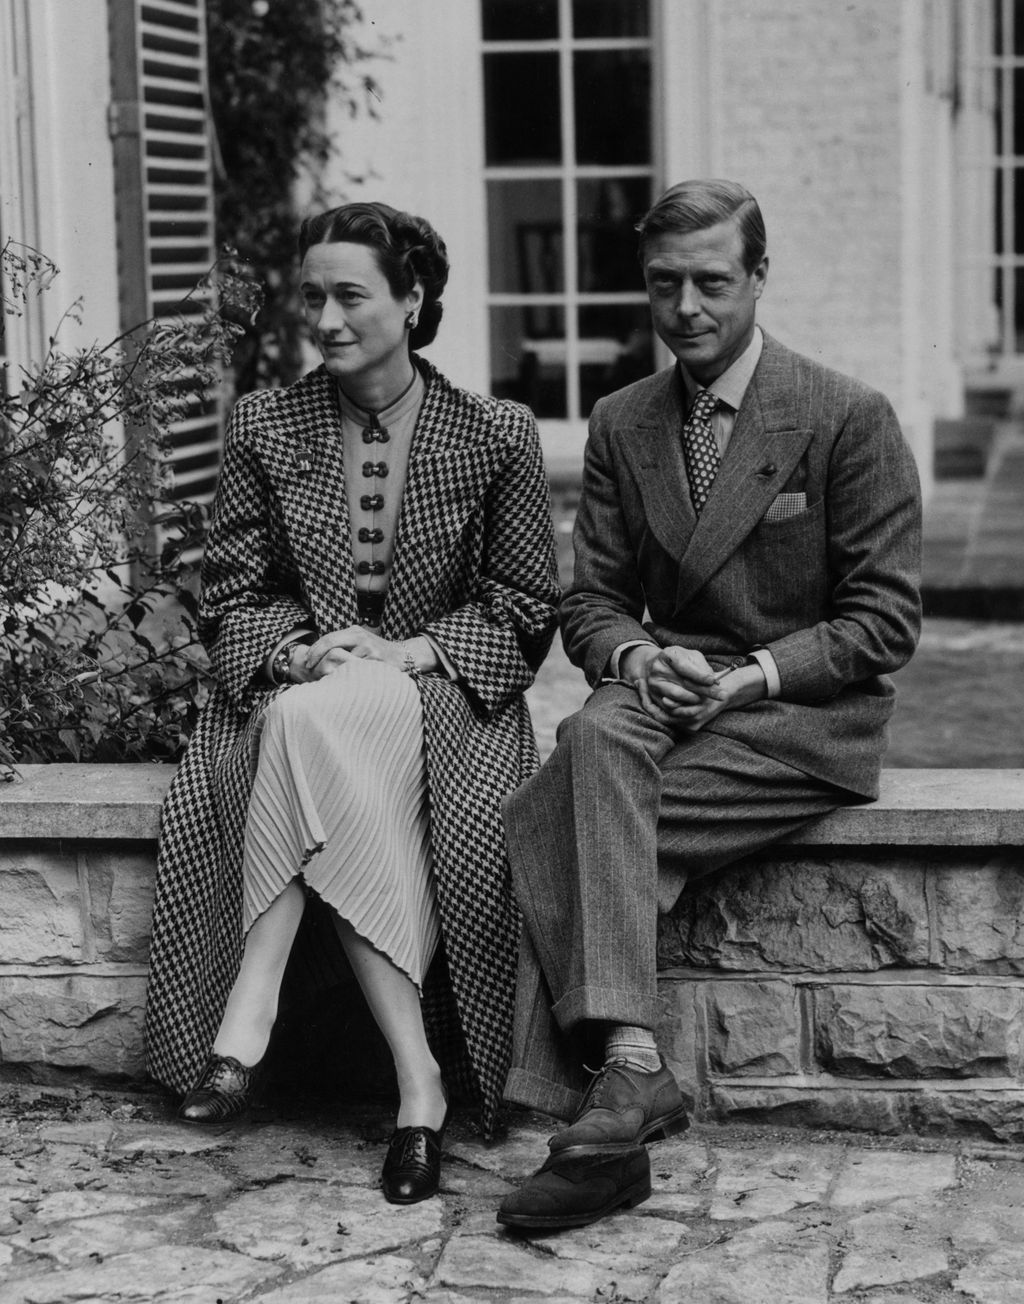 13th September 1939:  Duke (1894 - 1972) and Duchess (1896 - 1986) of Windsor at their temporary home near Ashdown Forest, Sussex after their return from France at the start of WW II. The first time they have been in England since the Duke's abdication.  (Photo by Central Press/Getty Images)